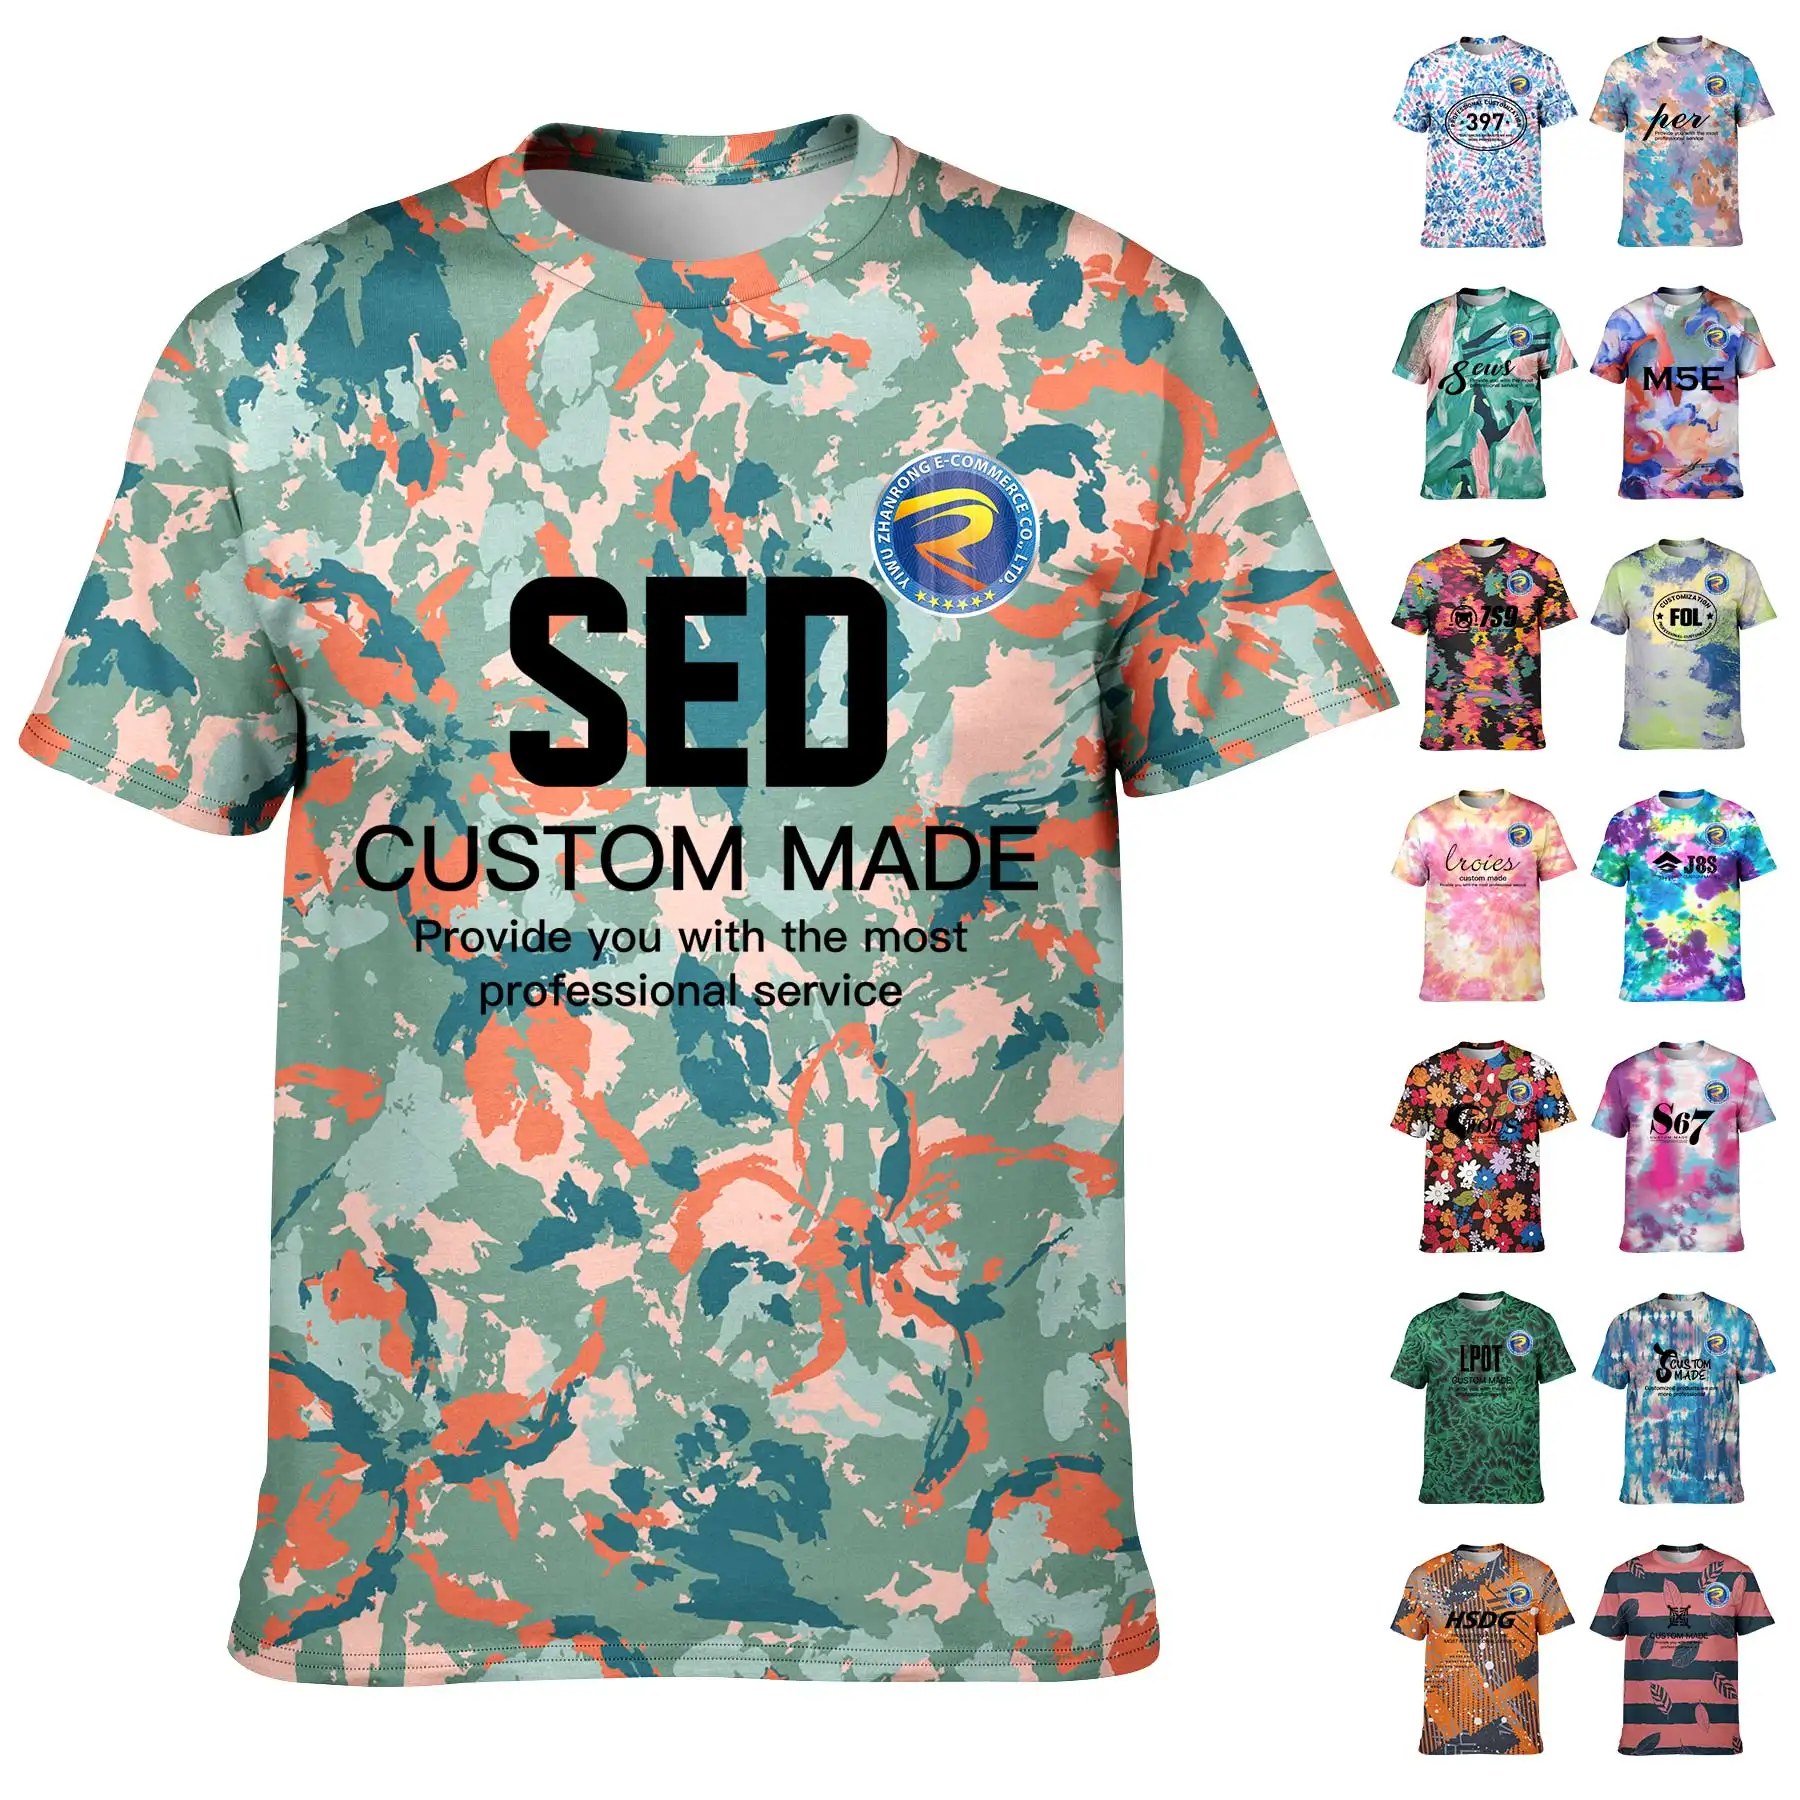 Cotton Unisex Sub Colorful Tie Dye T shirts Blank Embroidery Heavy weight t shirt printing custom Men's T-shirts